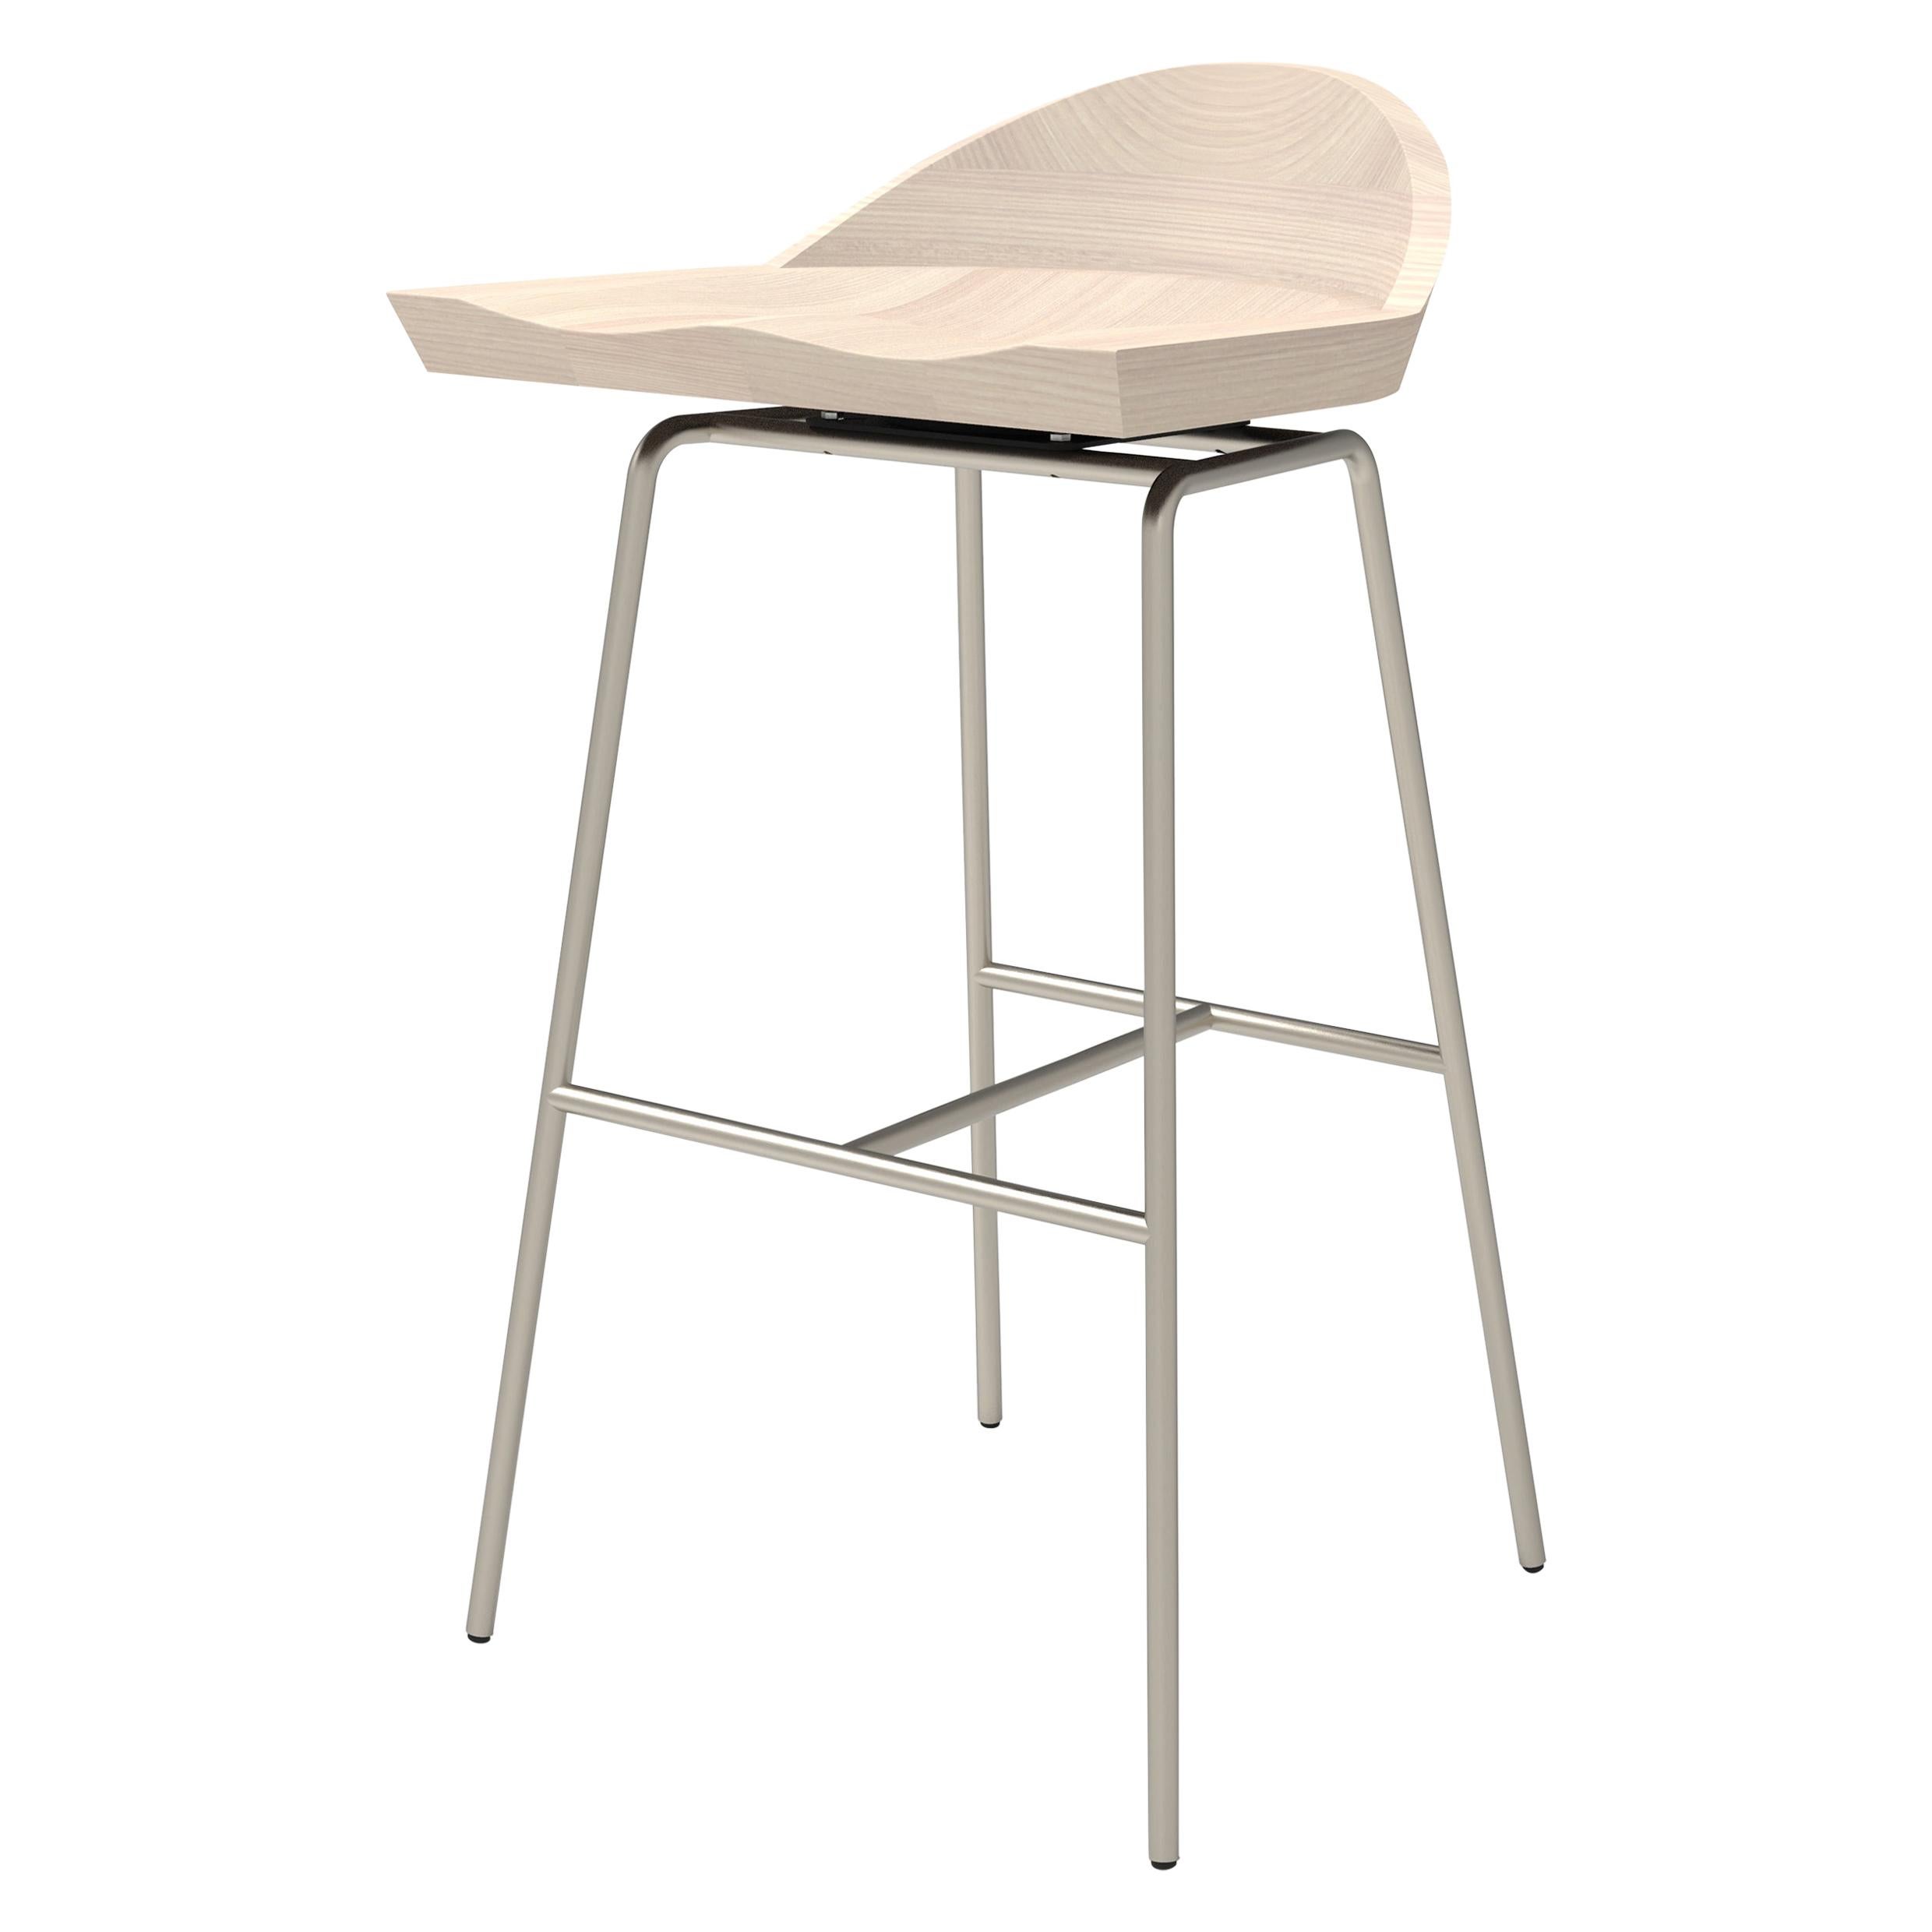 Spindle Bar Stool In Solid White Ash, Micks Bar Stools